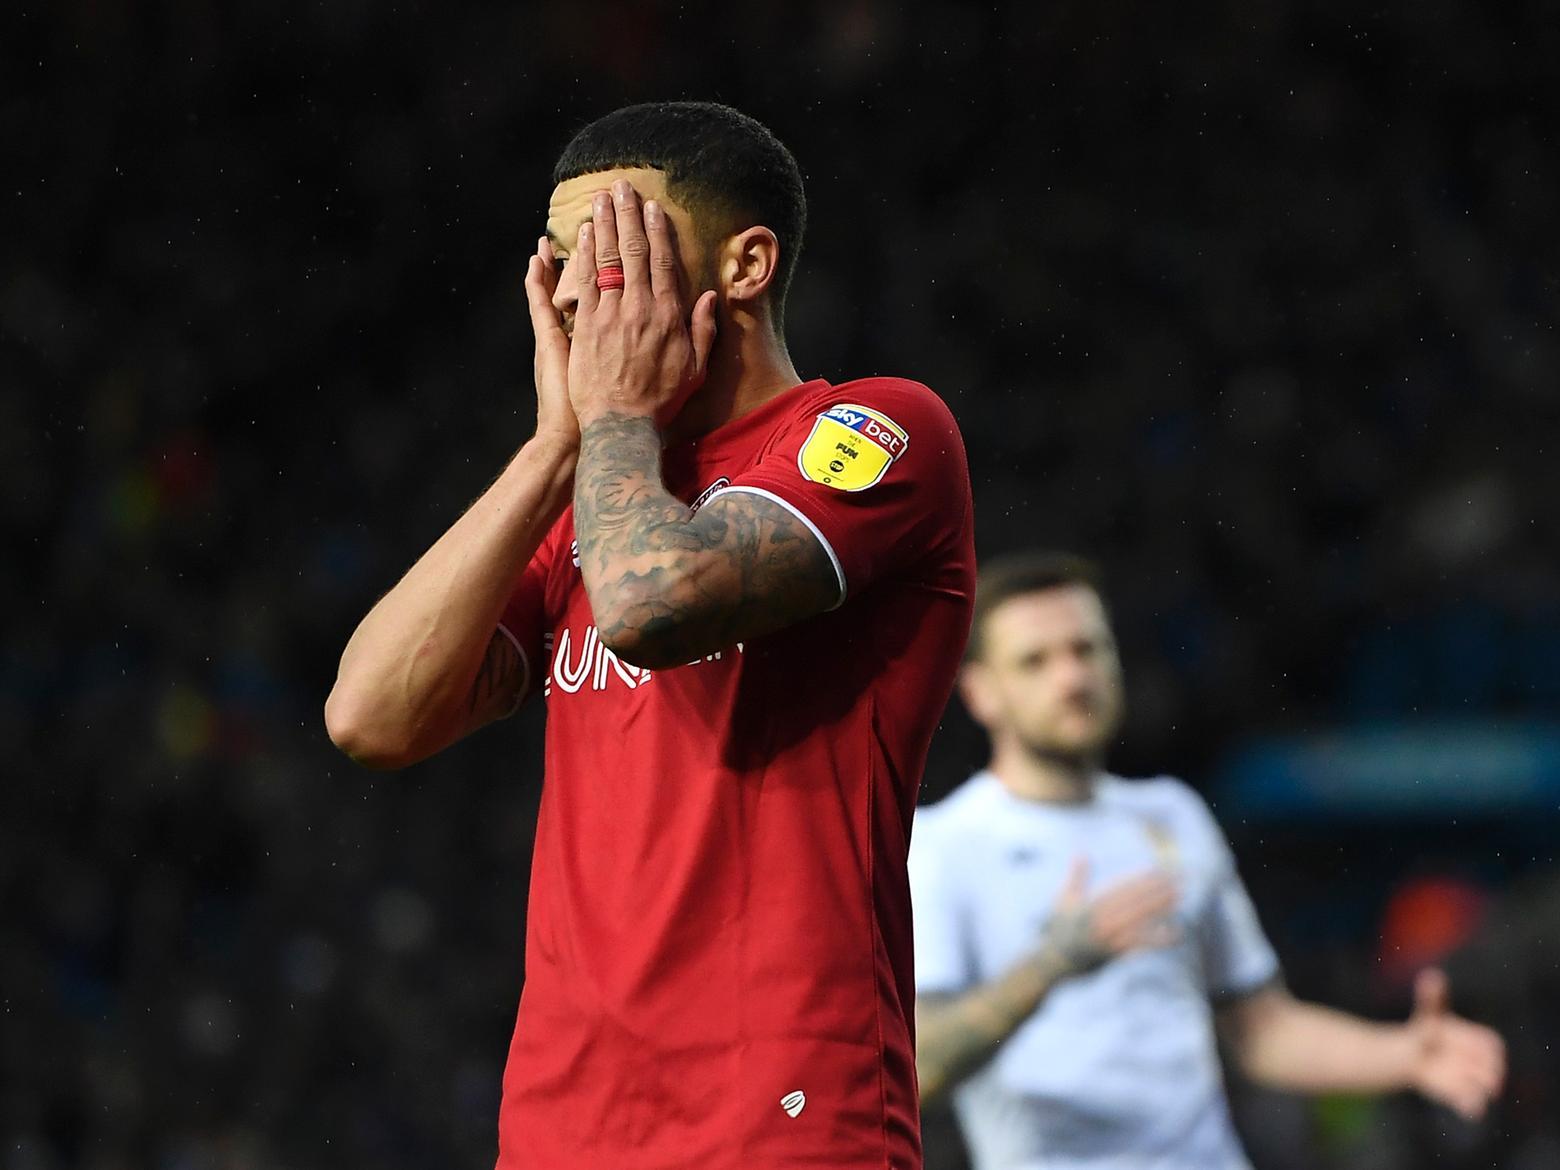 Ex-Leeds United star Jermaine Beckford has become the latest pundit to question the Whites' January recruitment, contending that they should have beaten Bristol City to 5m Nahki Wells. (talkSPORT)